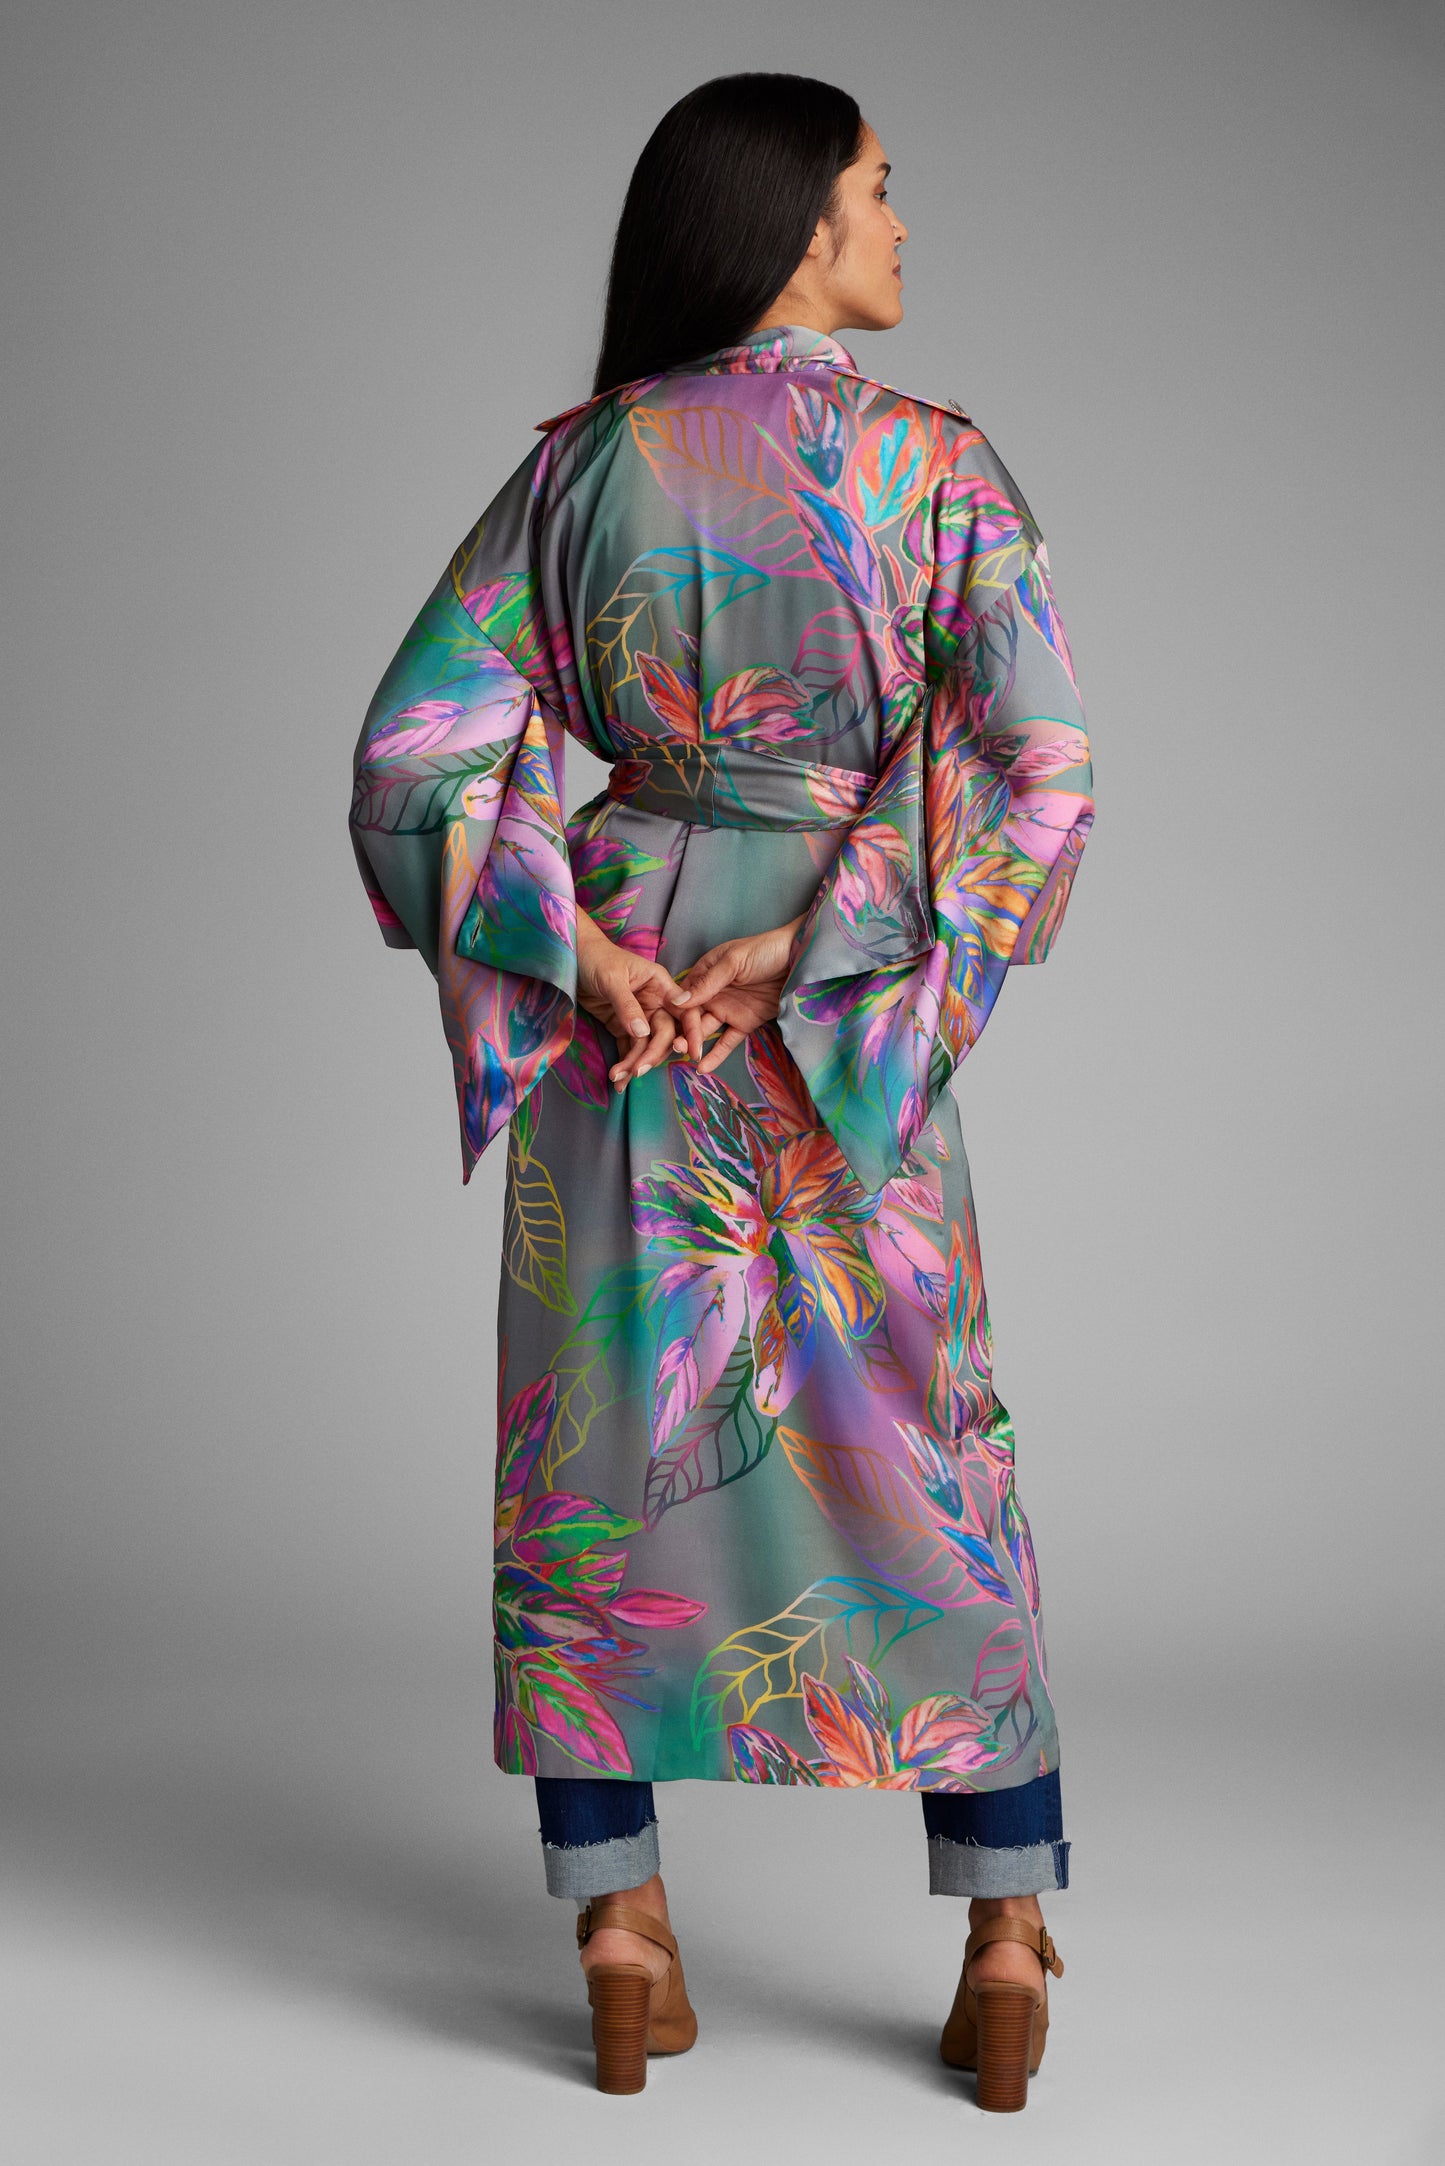 Back profile of woman modelling an all over tropical printed kimono duster made from recycled materials 2